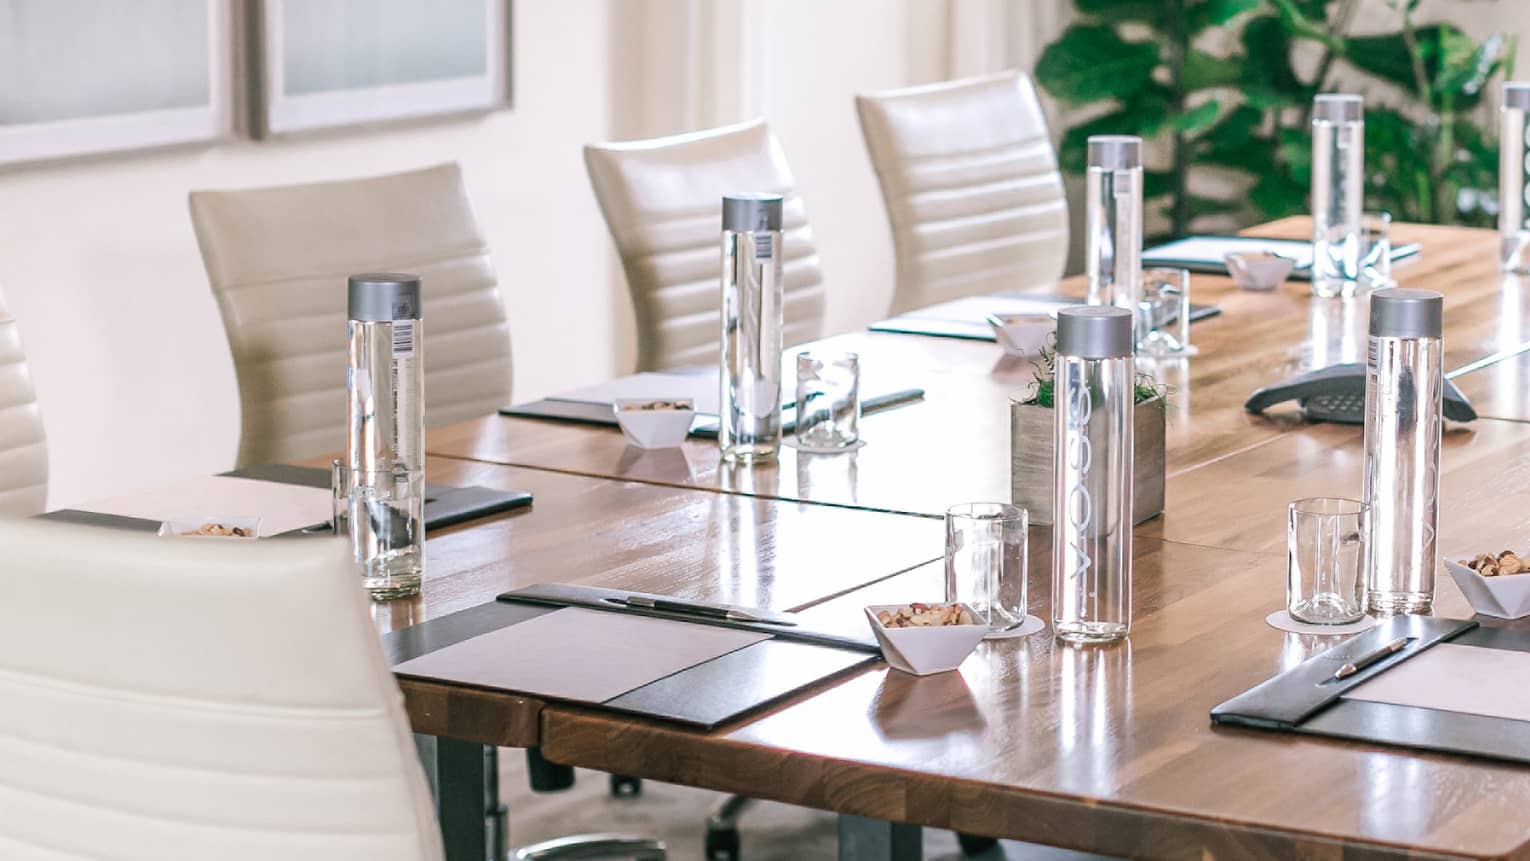 A rectangular boardroom table set with clear glass water bottles and black folders in a naturally-lit room